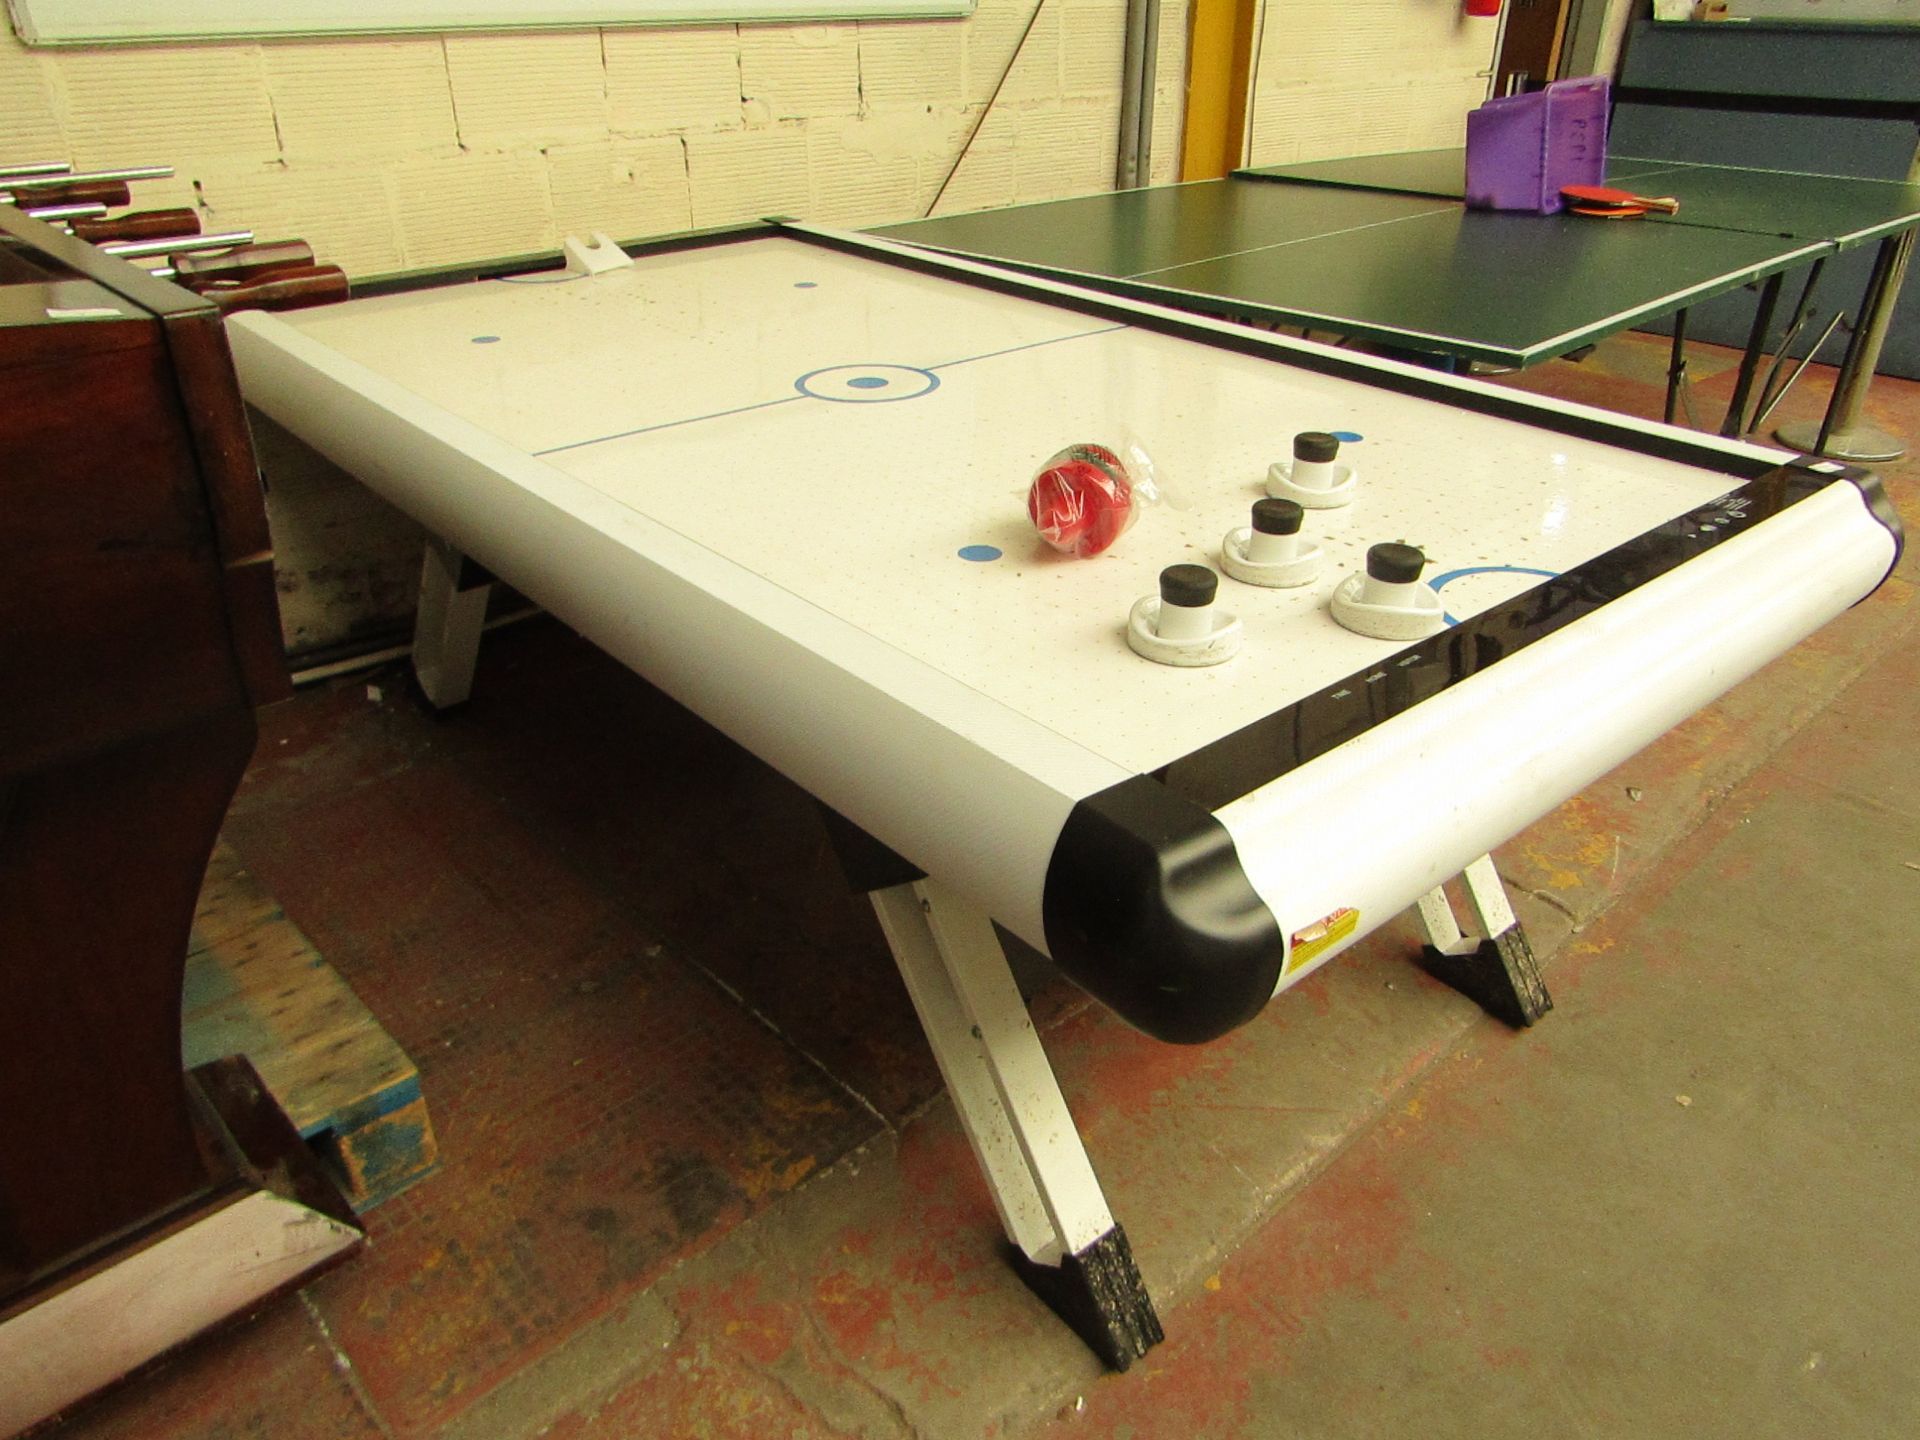 Commercial Large Air Hockey Table.Working when Removed from venue.226 x 122 x 77cm.Incl accesories